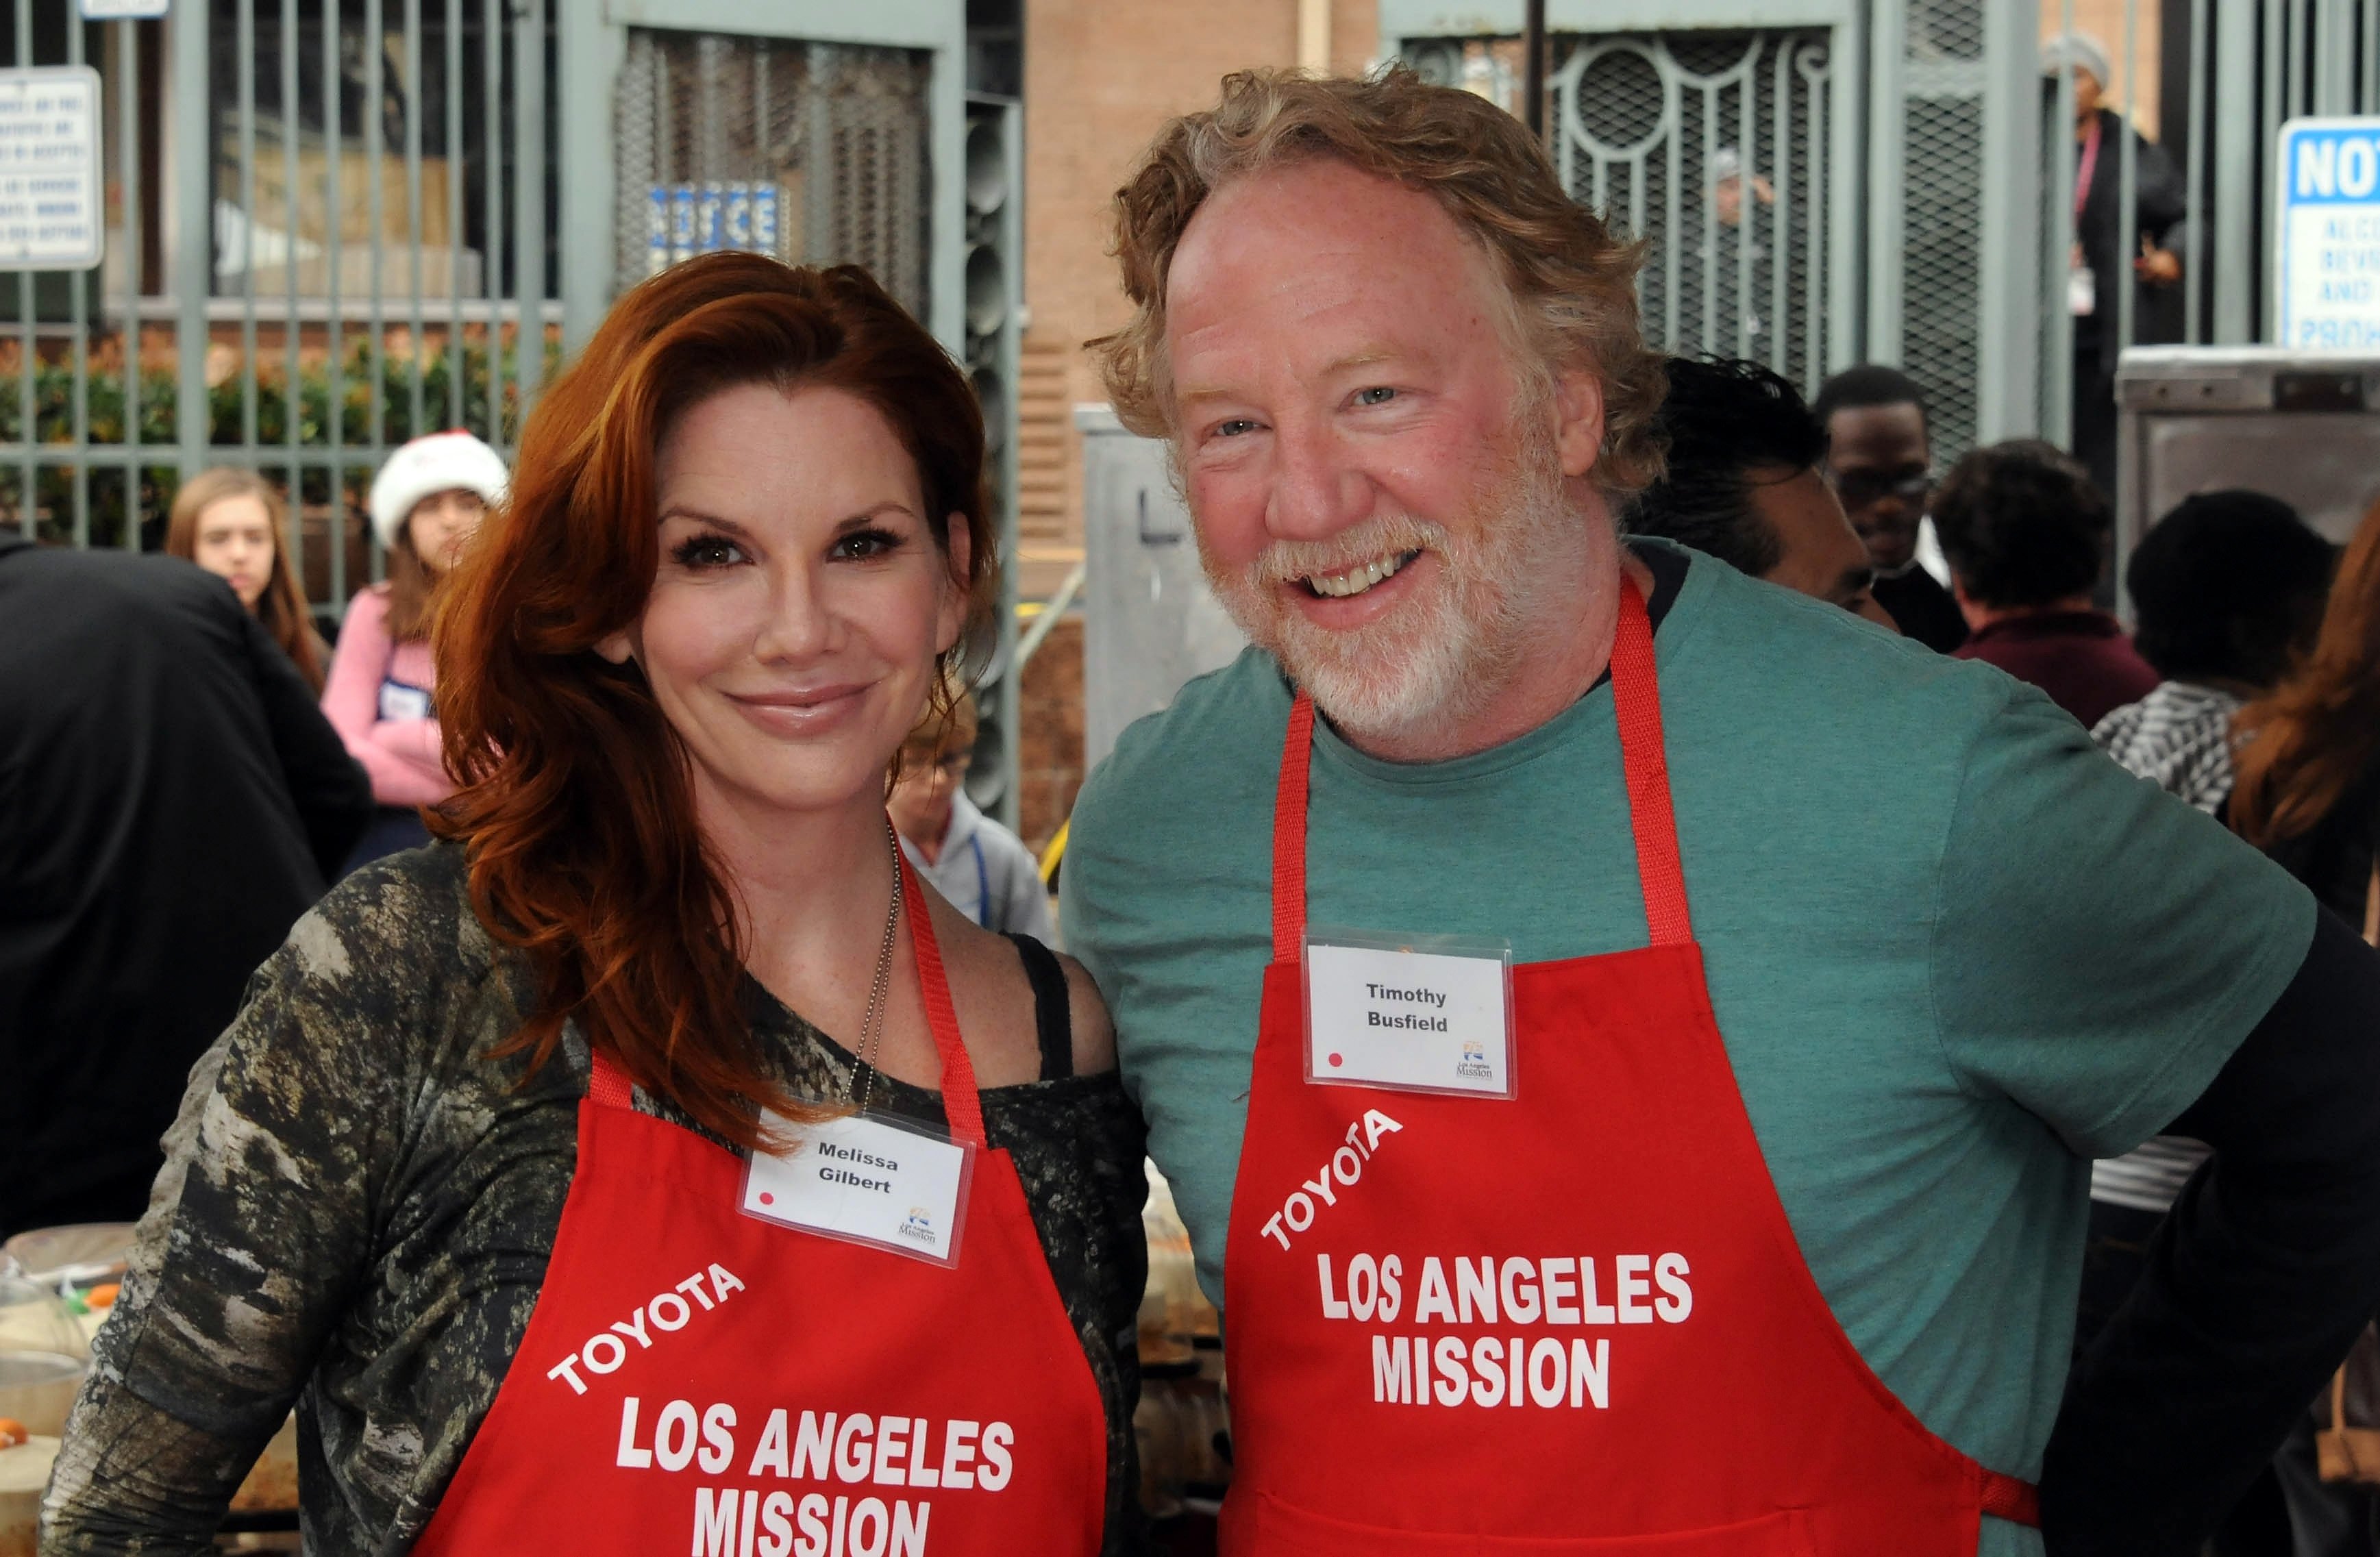 Melissa Gilbert and Timothy Busfield at the Los Angeles Mission in serving aprons.